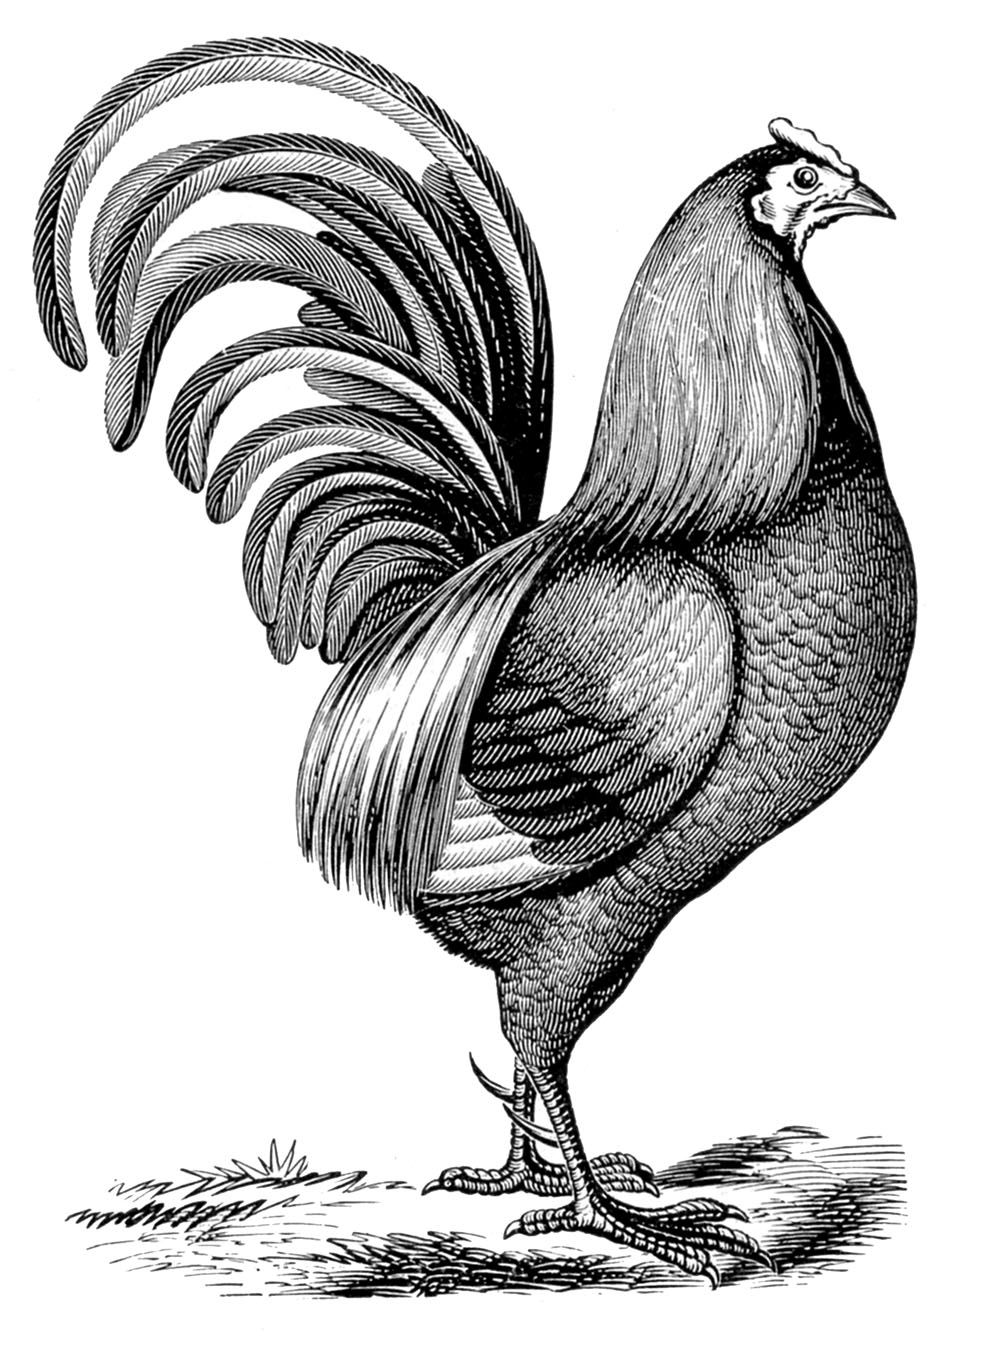 Vintage clip art chicken with fancy tail the graphics fairy